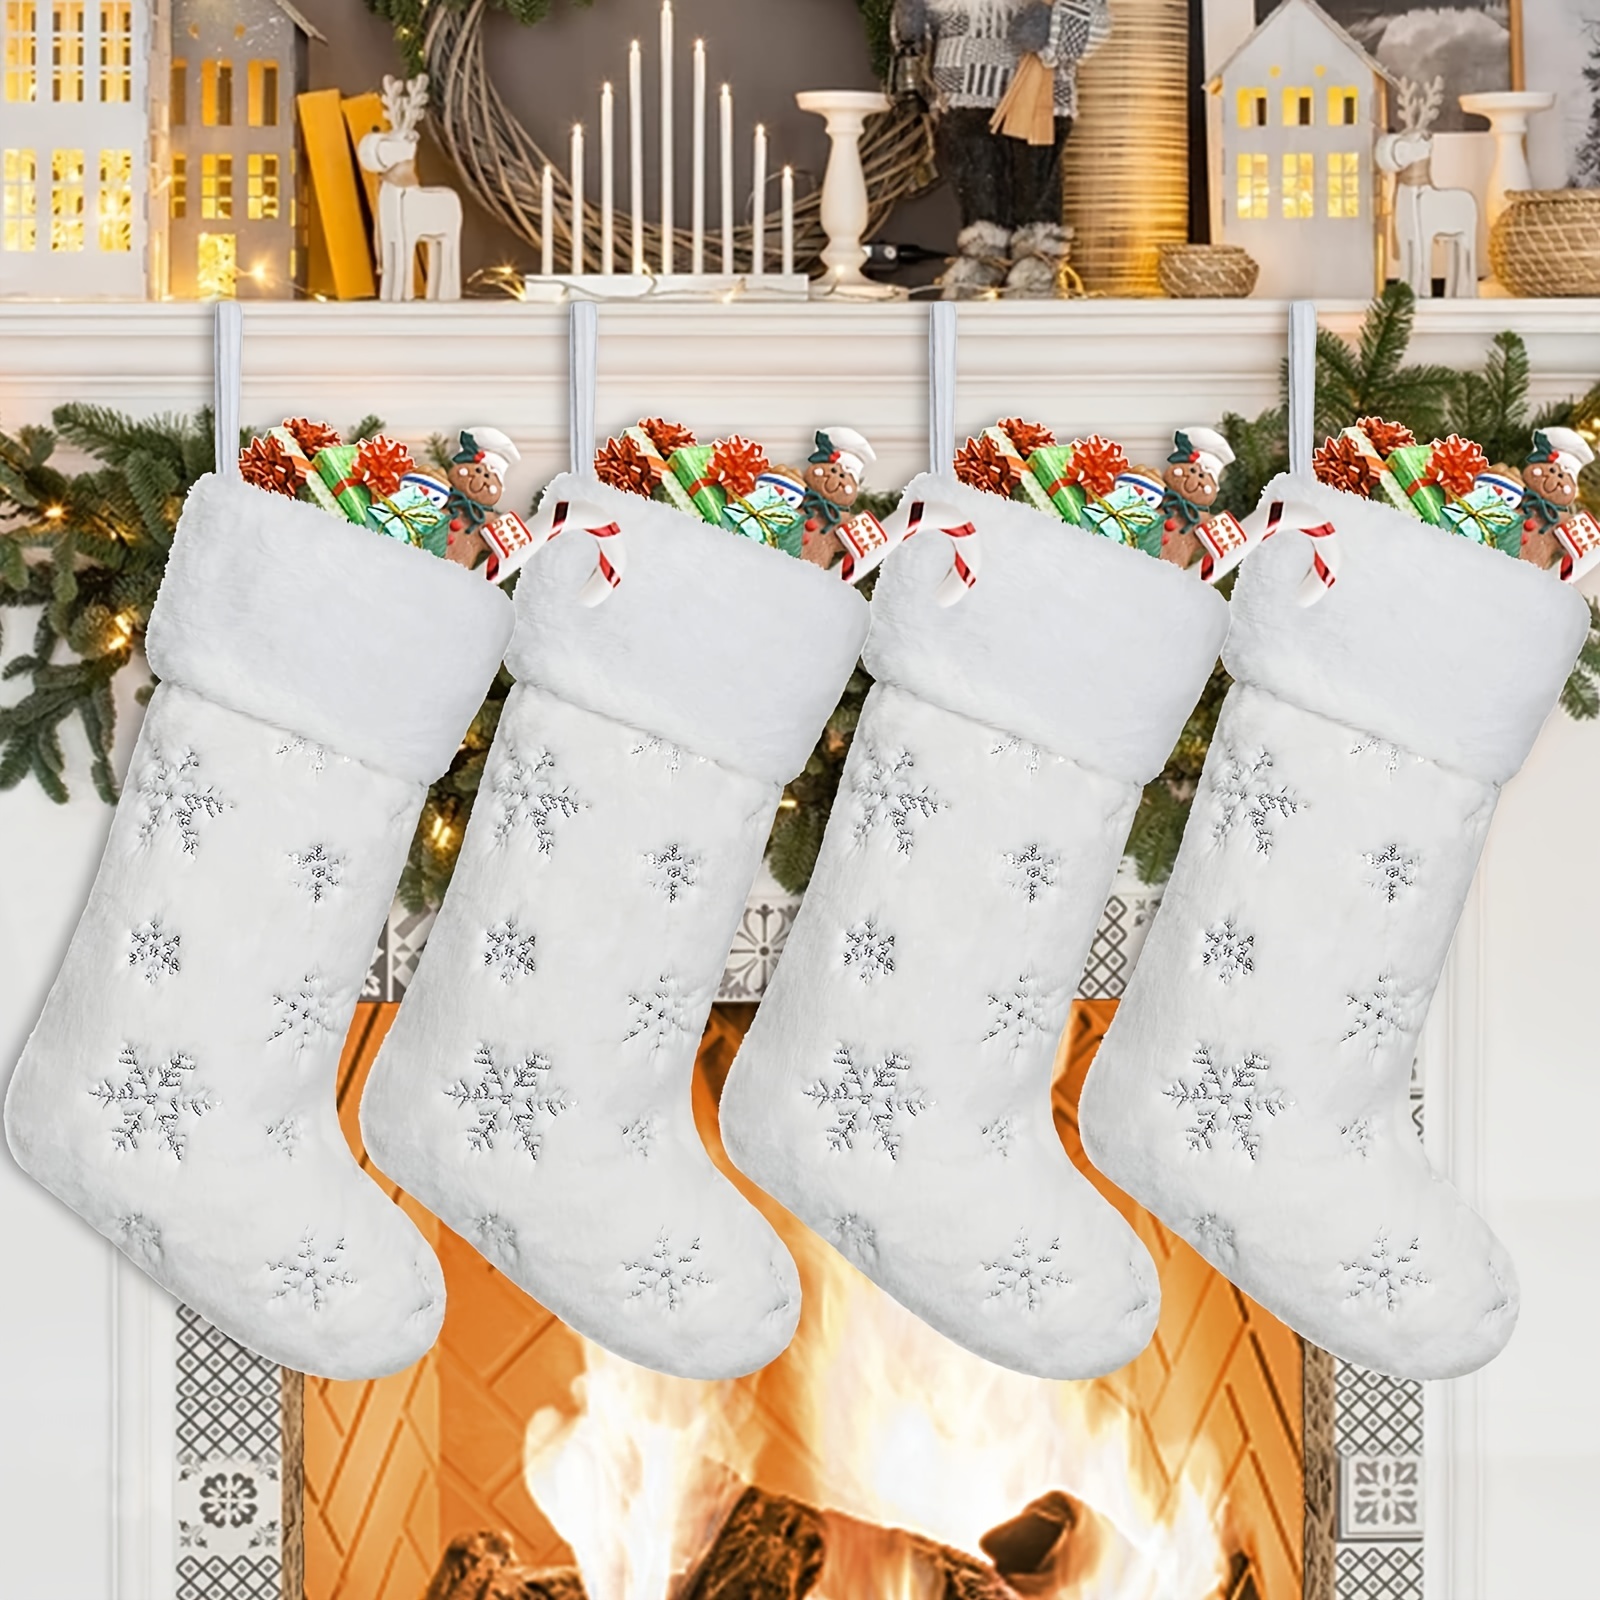 

4pcs, Christmas Stockings, 20 Inch Cream White Faux Fur Xmas Stockings With Silver Sequin Snowflakes Super Soft Thick Plush Xmas Stockings For Christmas Decoration Holiday Decor